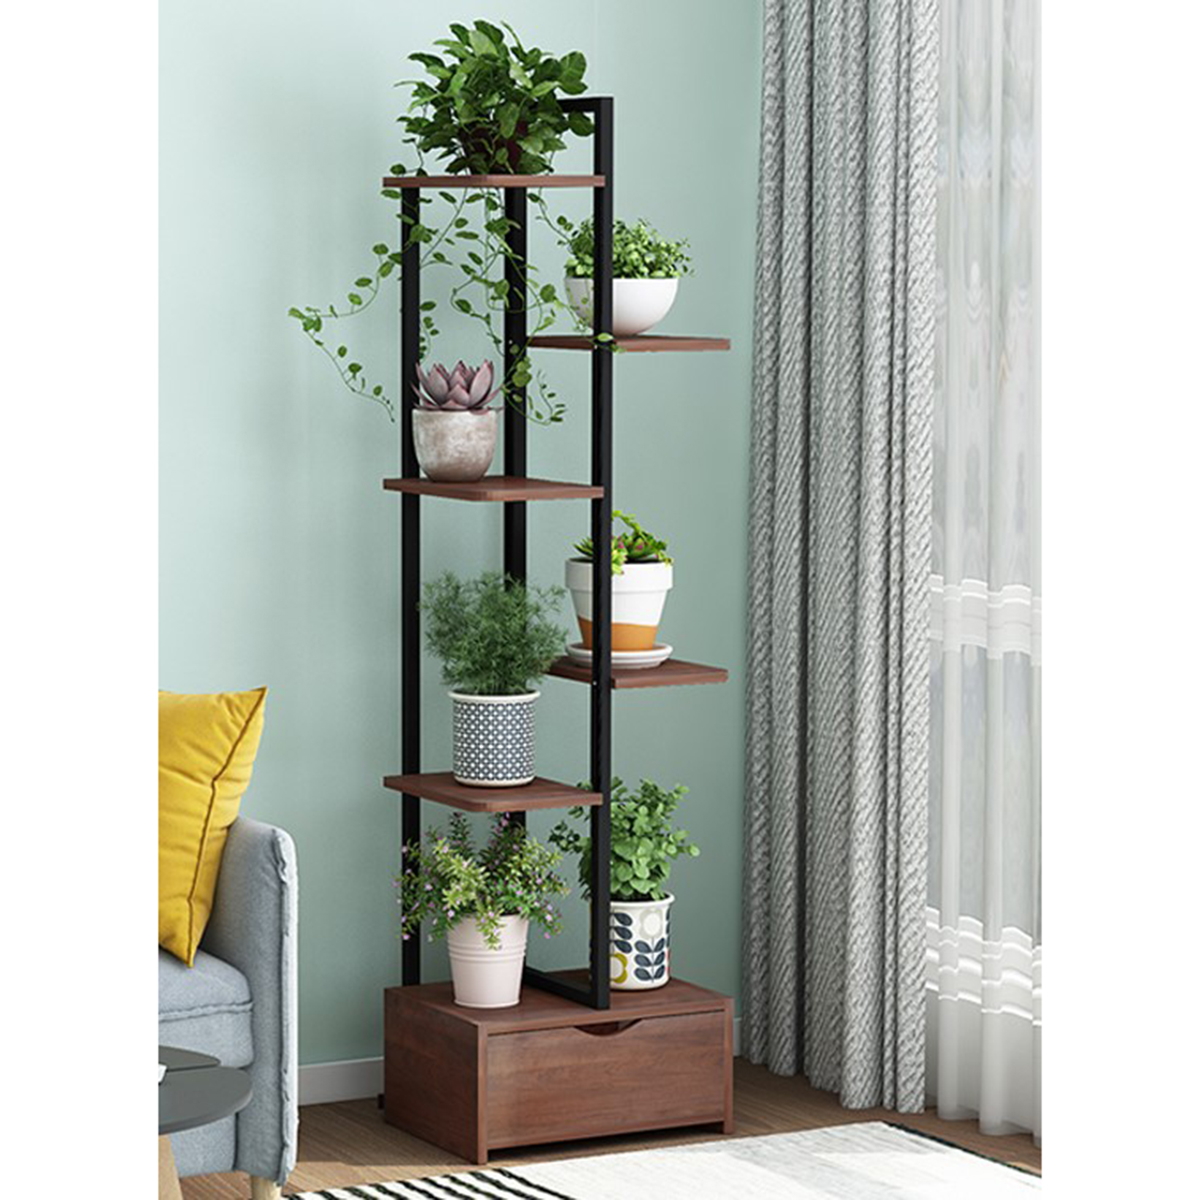 5-Layers-Plate-Floor-Balcony-Shelf-with-Drawer-Green-Flower-Shelf-Decoration-Home-Living-Room-Orname-1769123-18